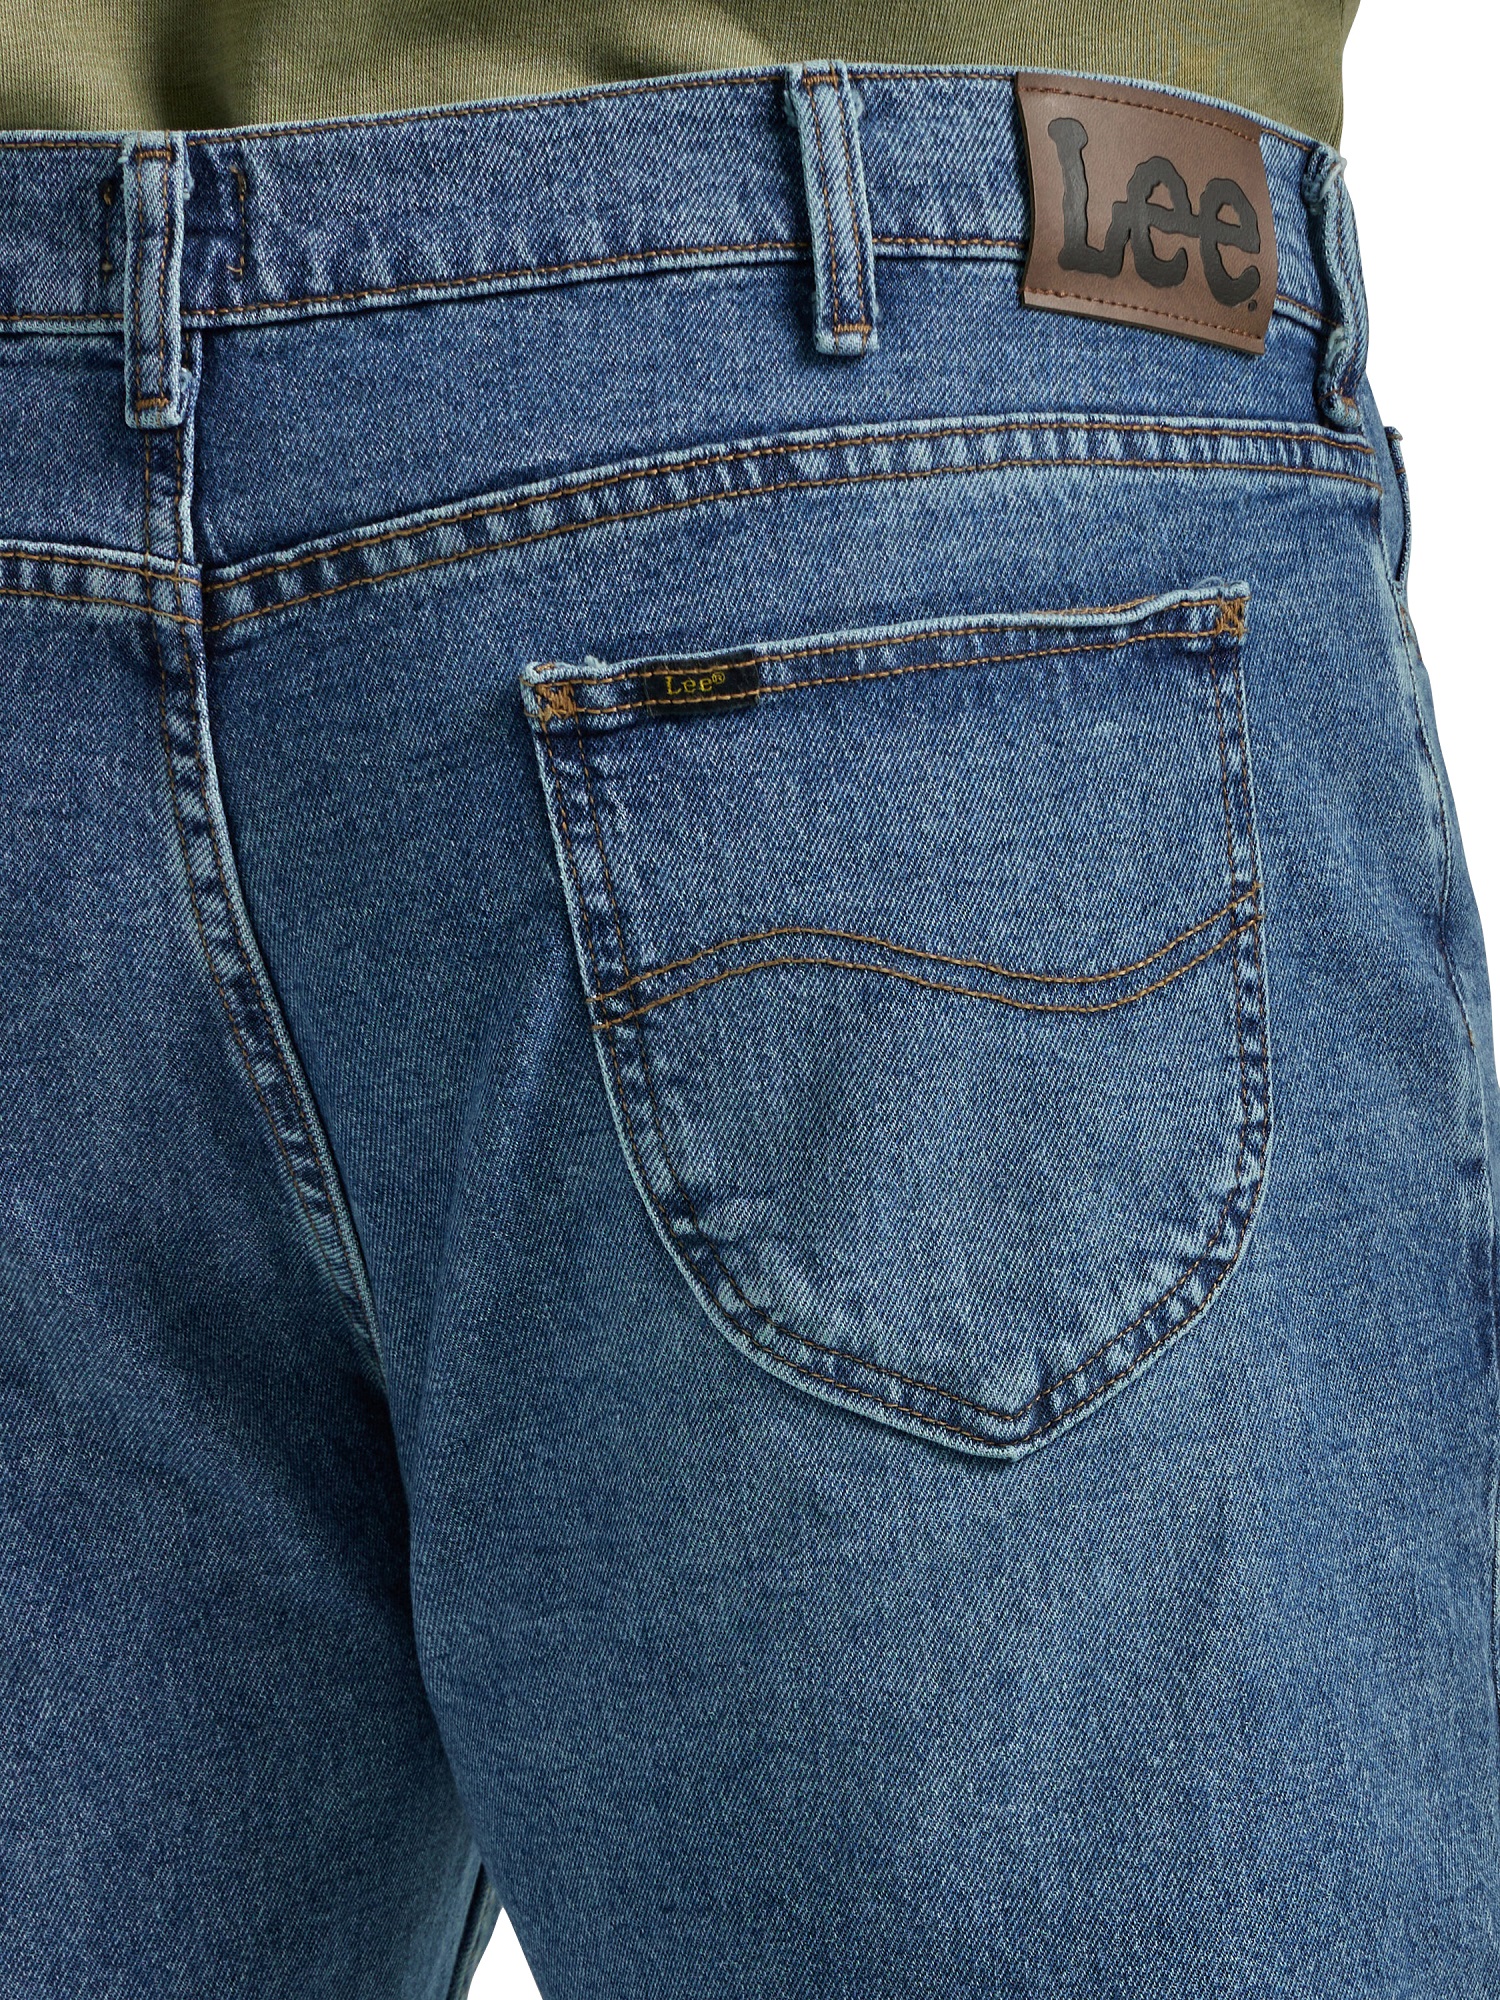 Lee® Big Men's Legendary Relaxed Straight Jean - image 5 of 6